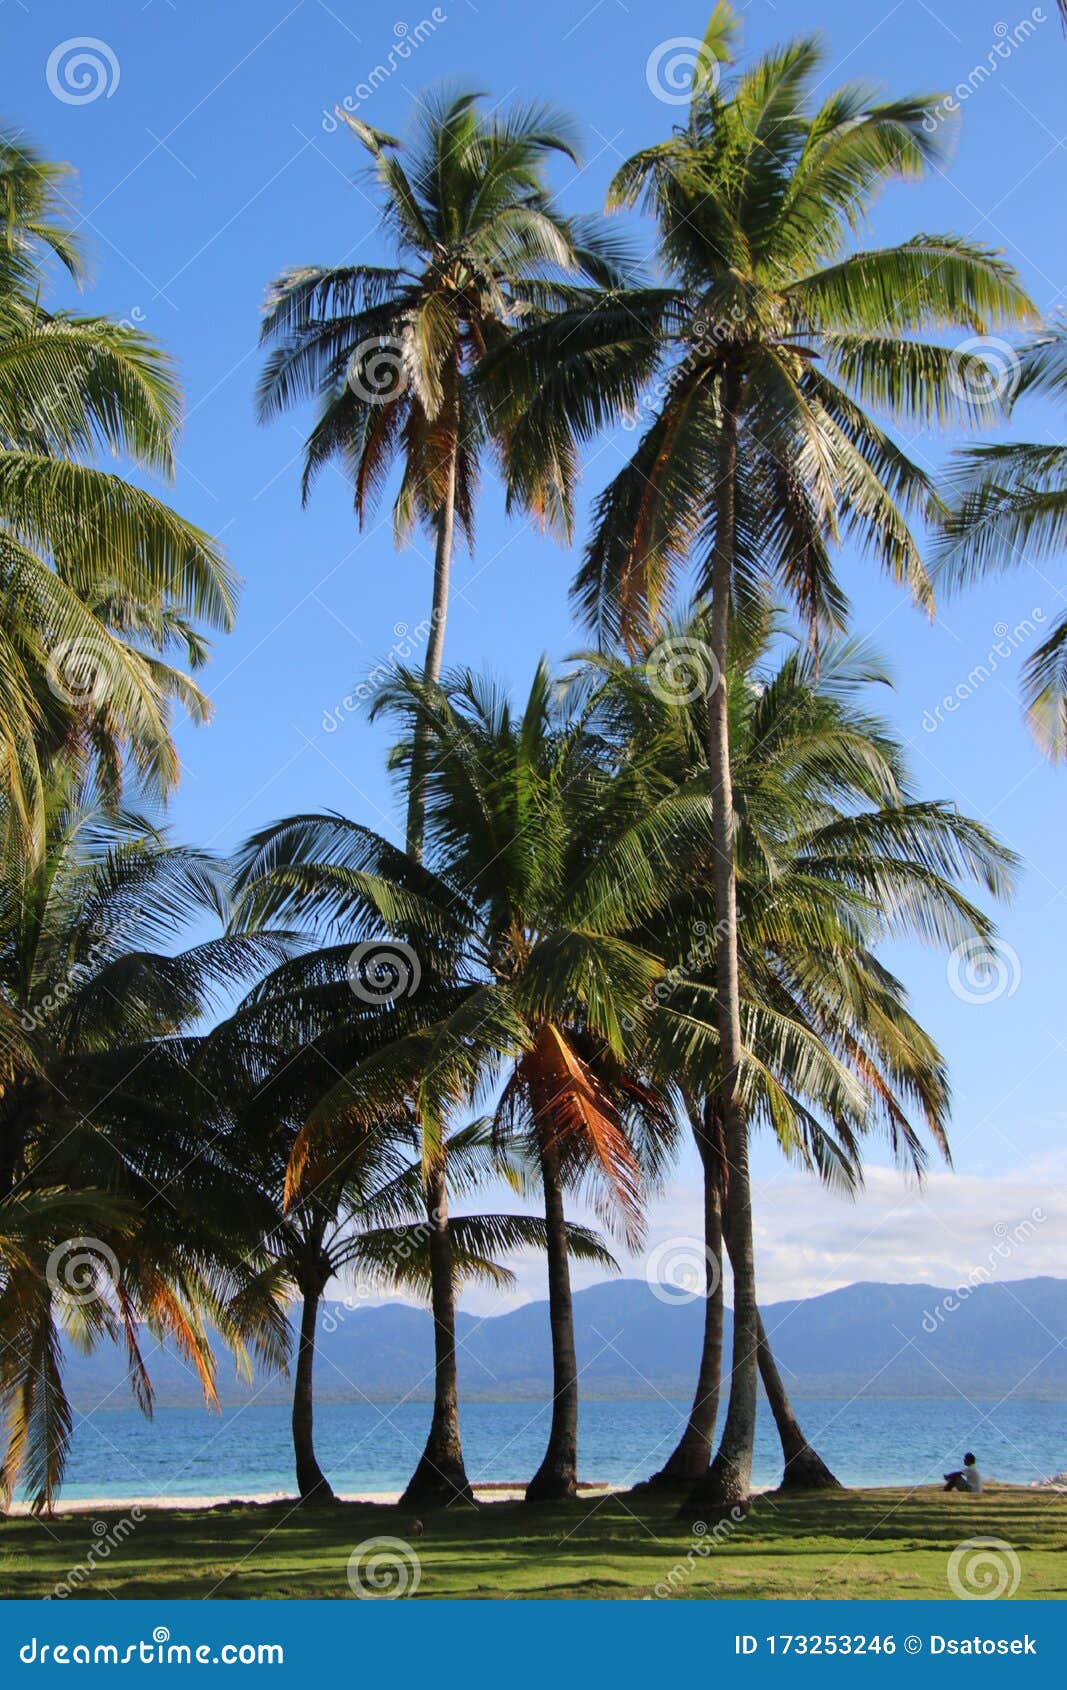 Tropical Beach and Coconut Trees Stock Photo - Image of islandsnblue ...